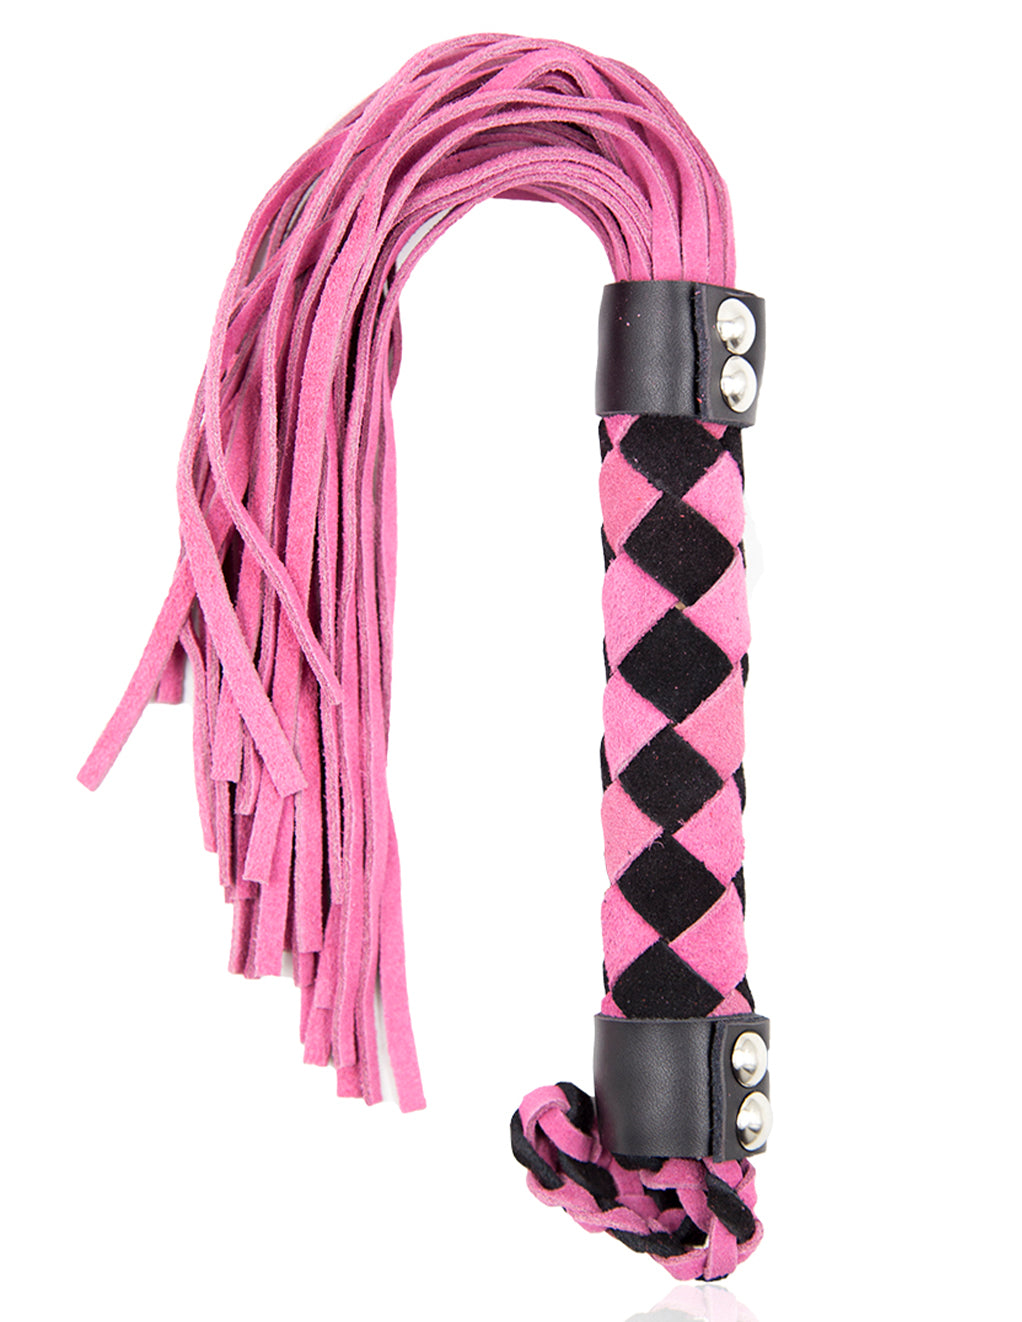 Bizarre Video 15" Leather Flogger- Pink- Front